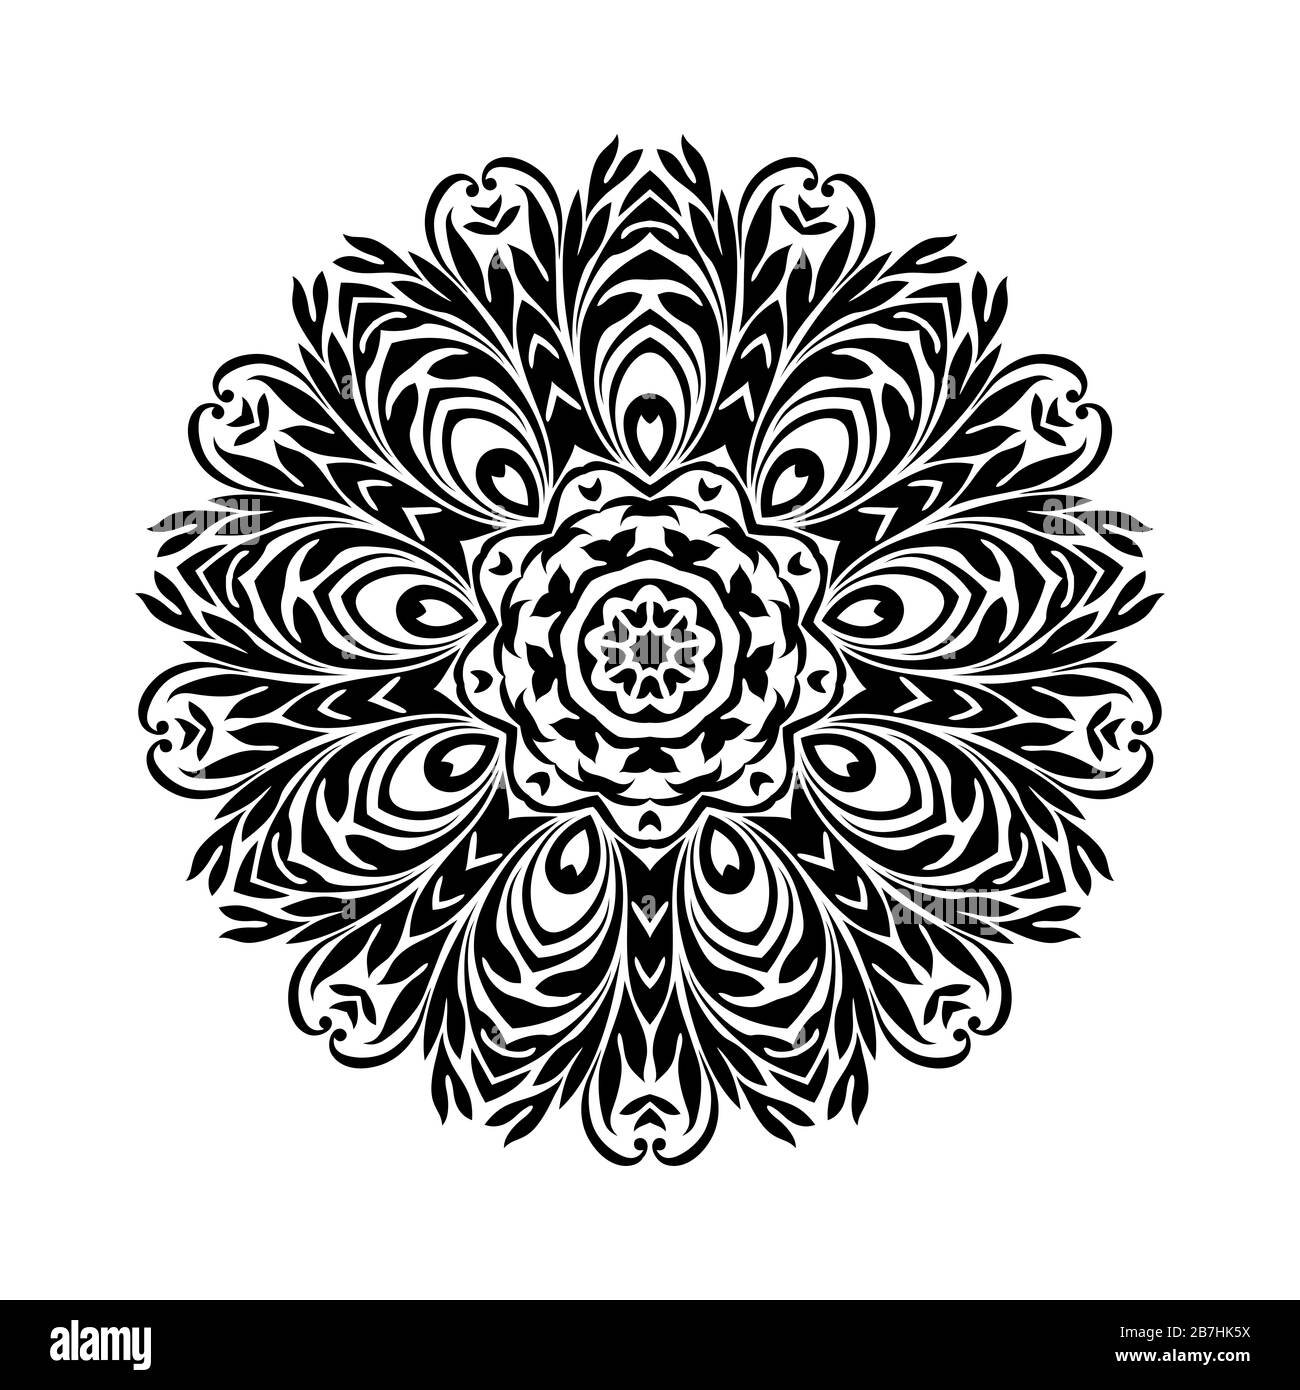 Round black mandala on white isolated background. Decorative ornament in ethnic oriental style. Perfect for any design, birthday, holiday, kaleidoscop Stock Photo